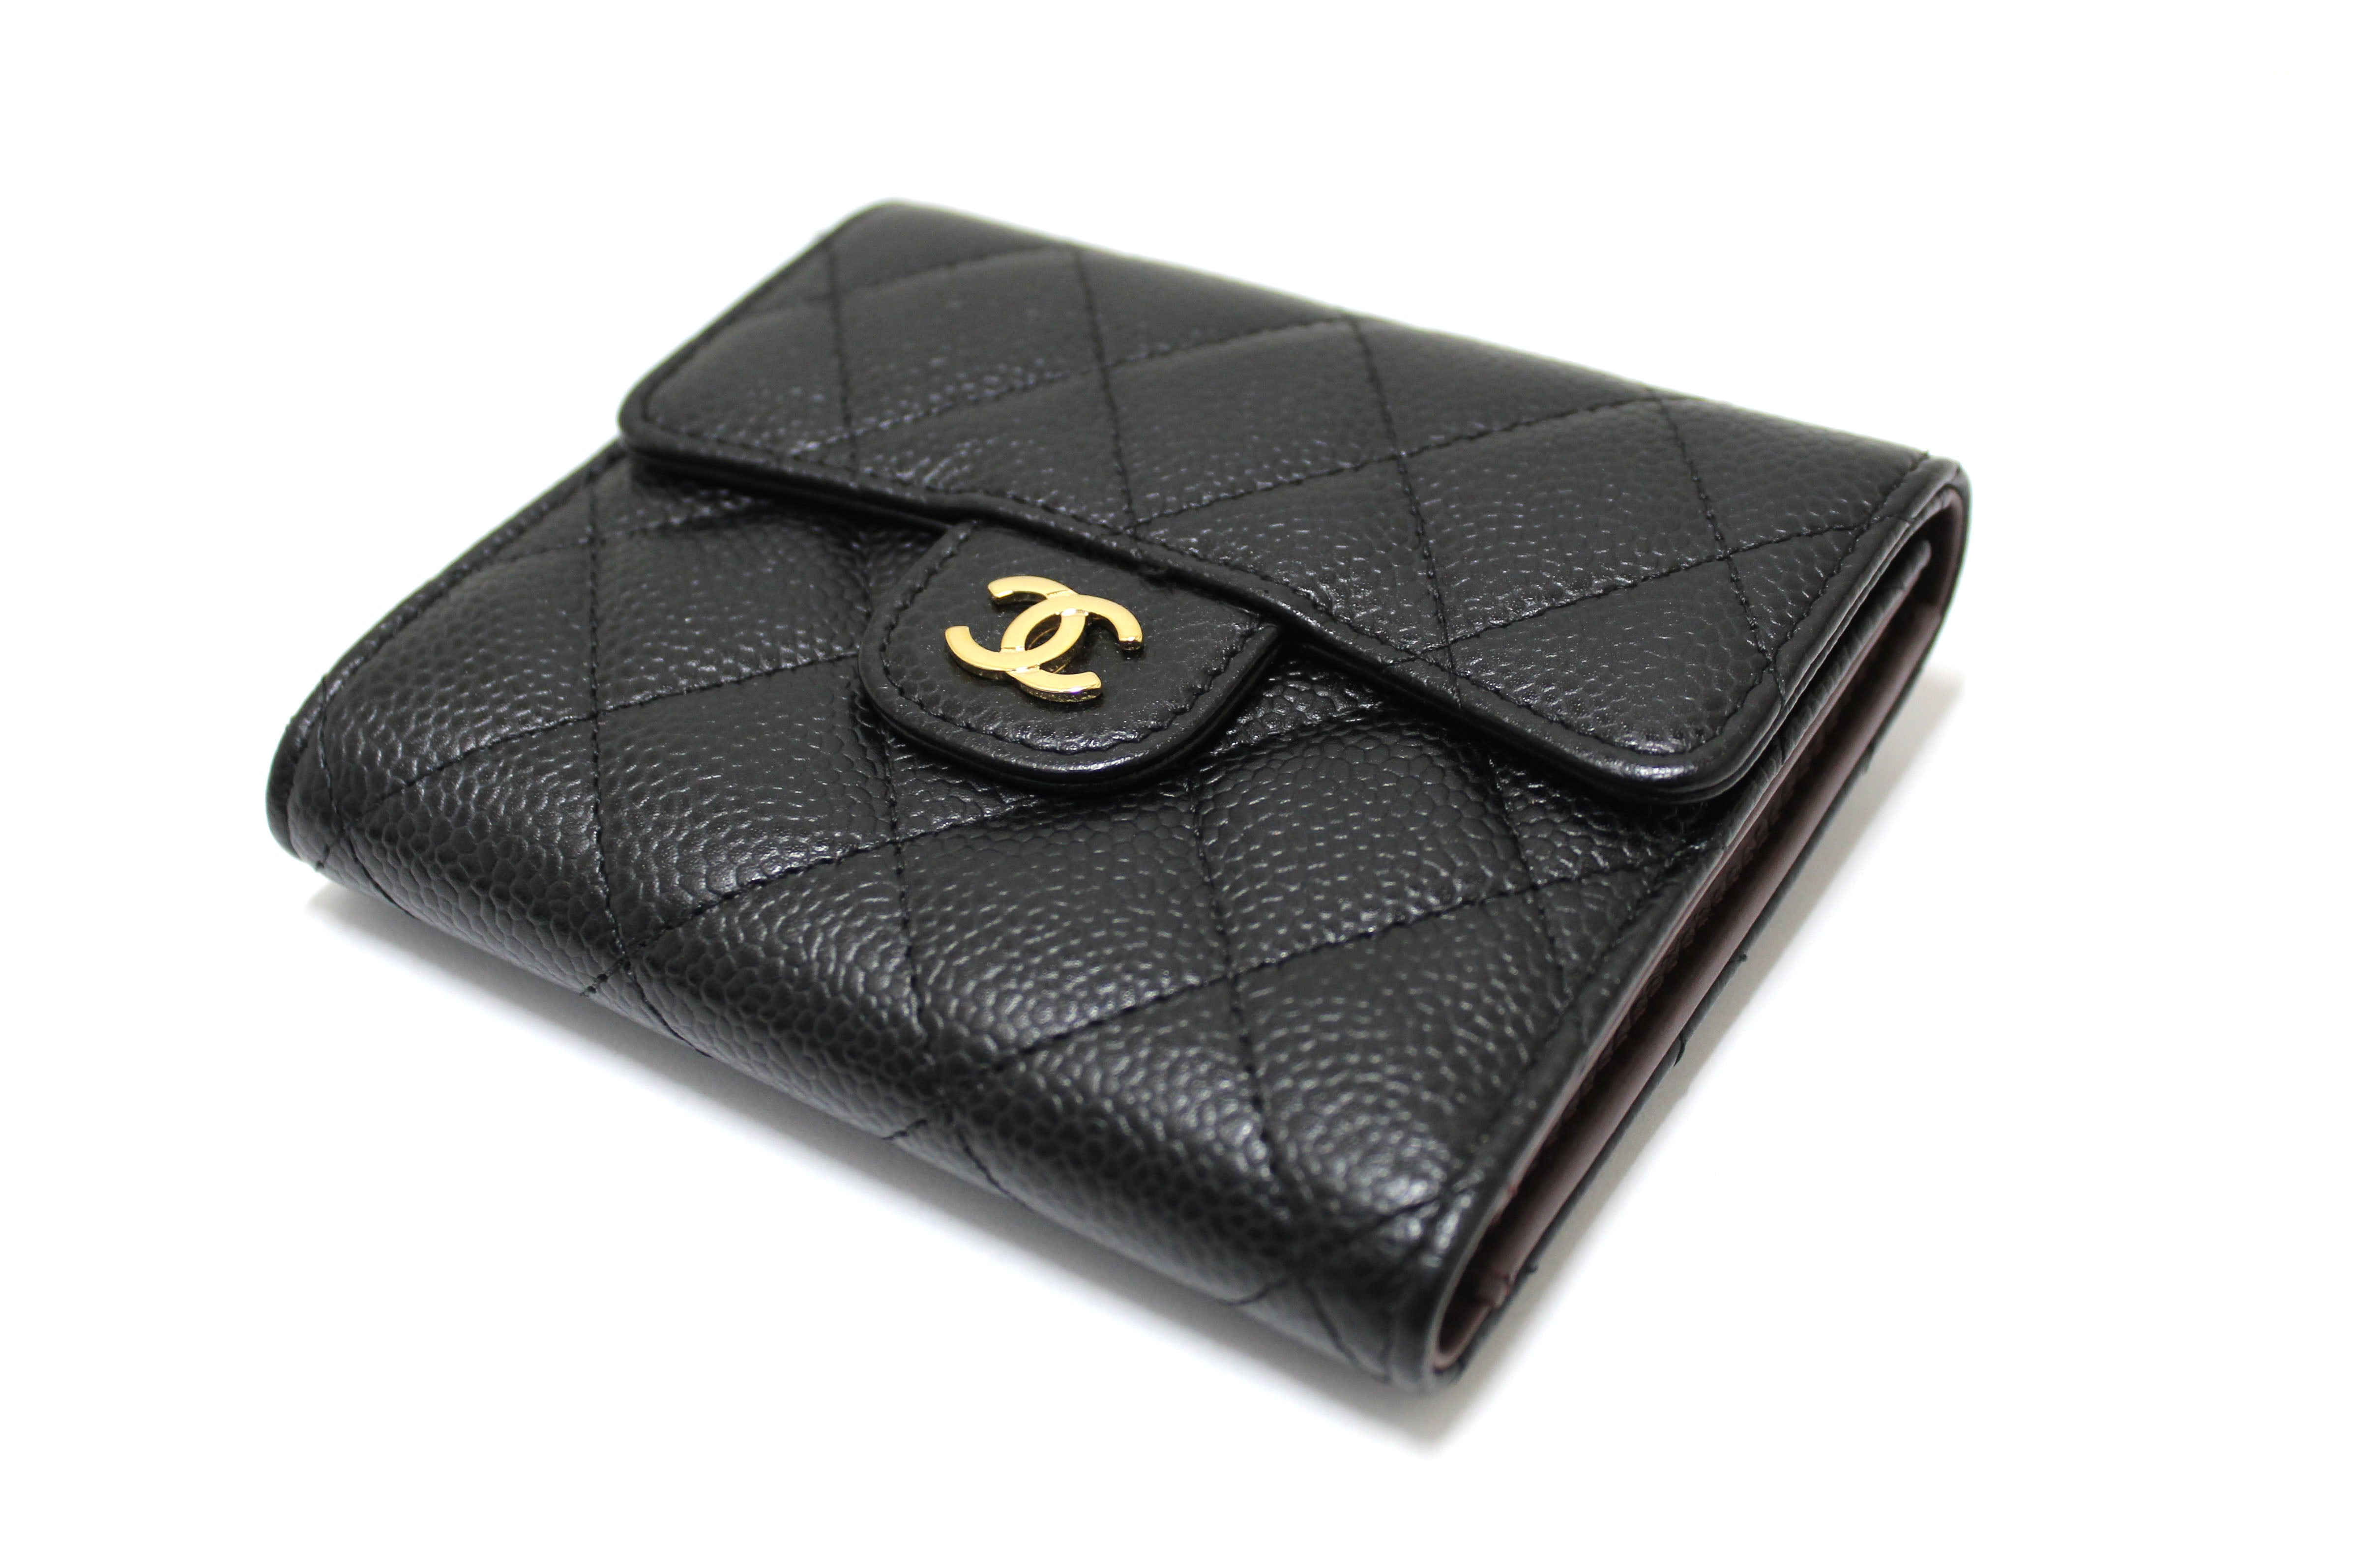 Chanel Classic small Wallet